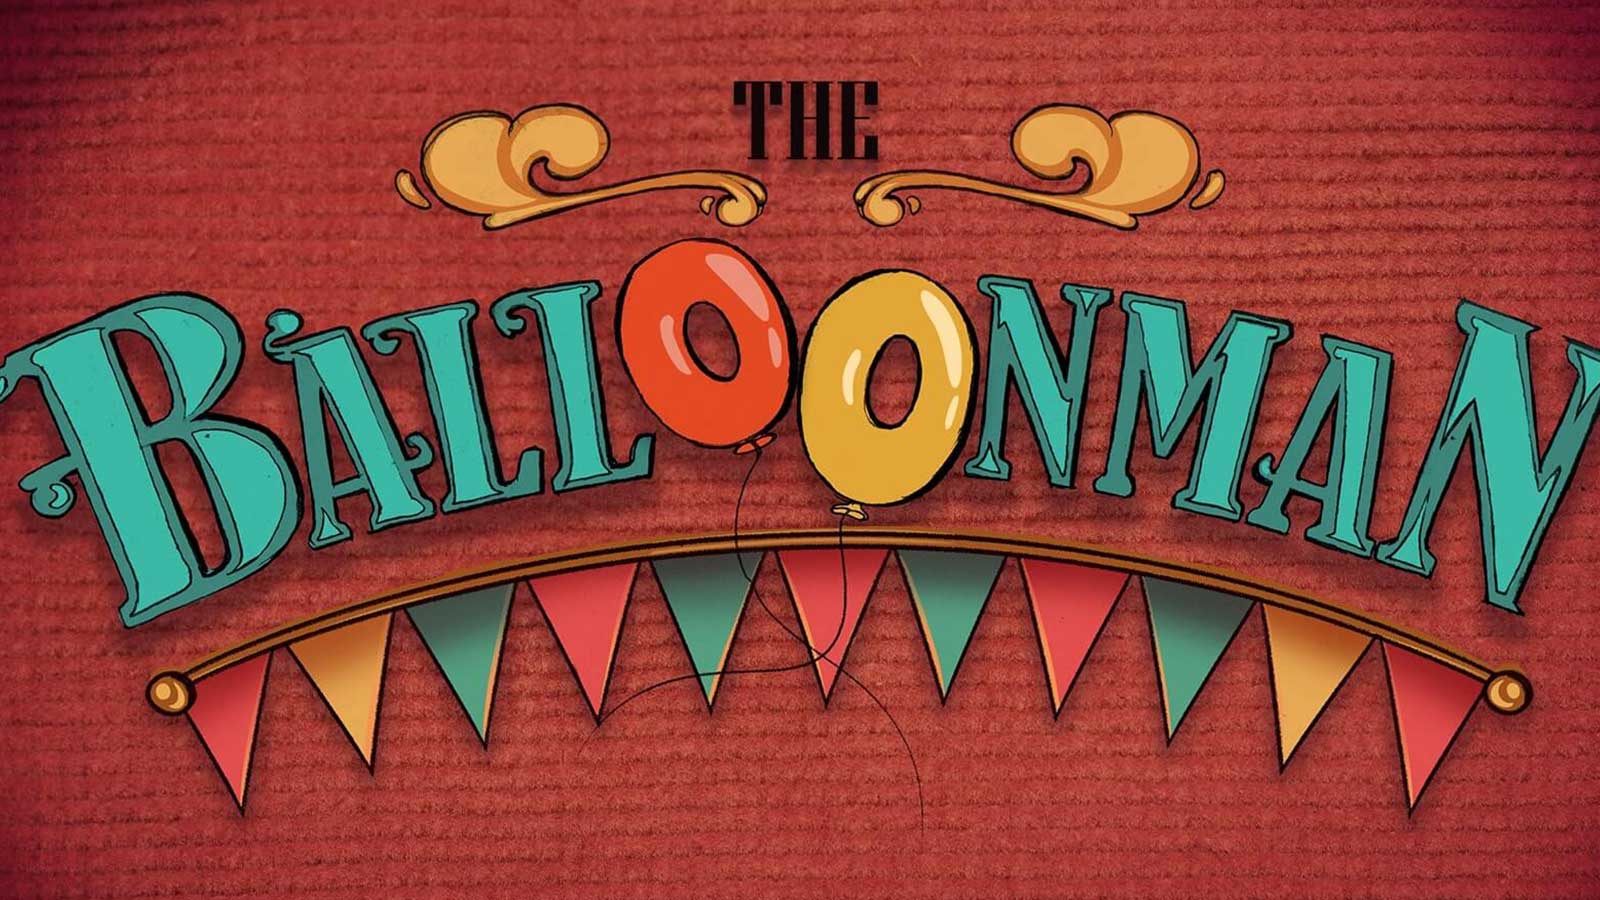 The title card for the animation "The Balloonman"